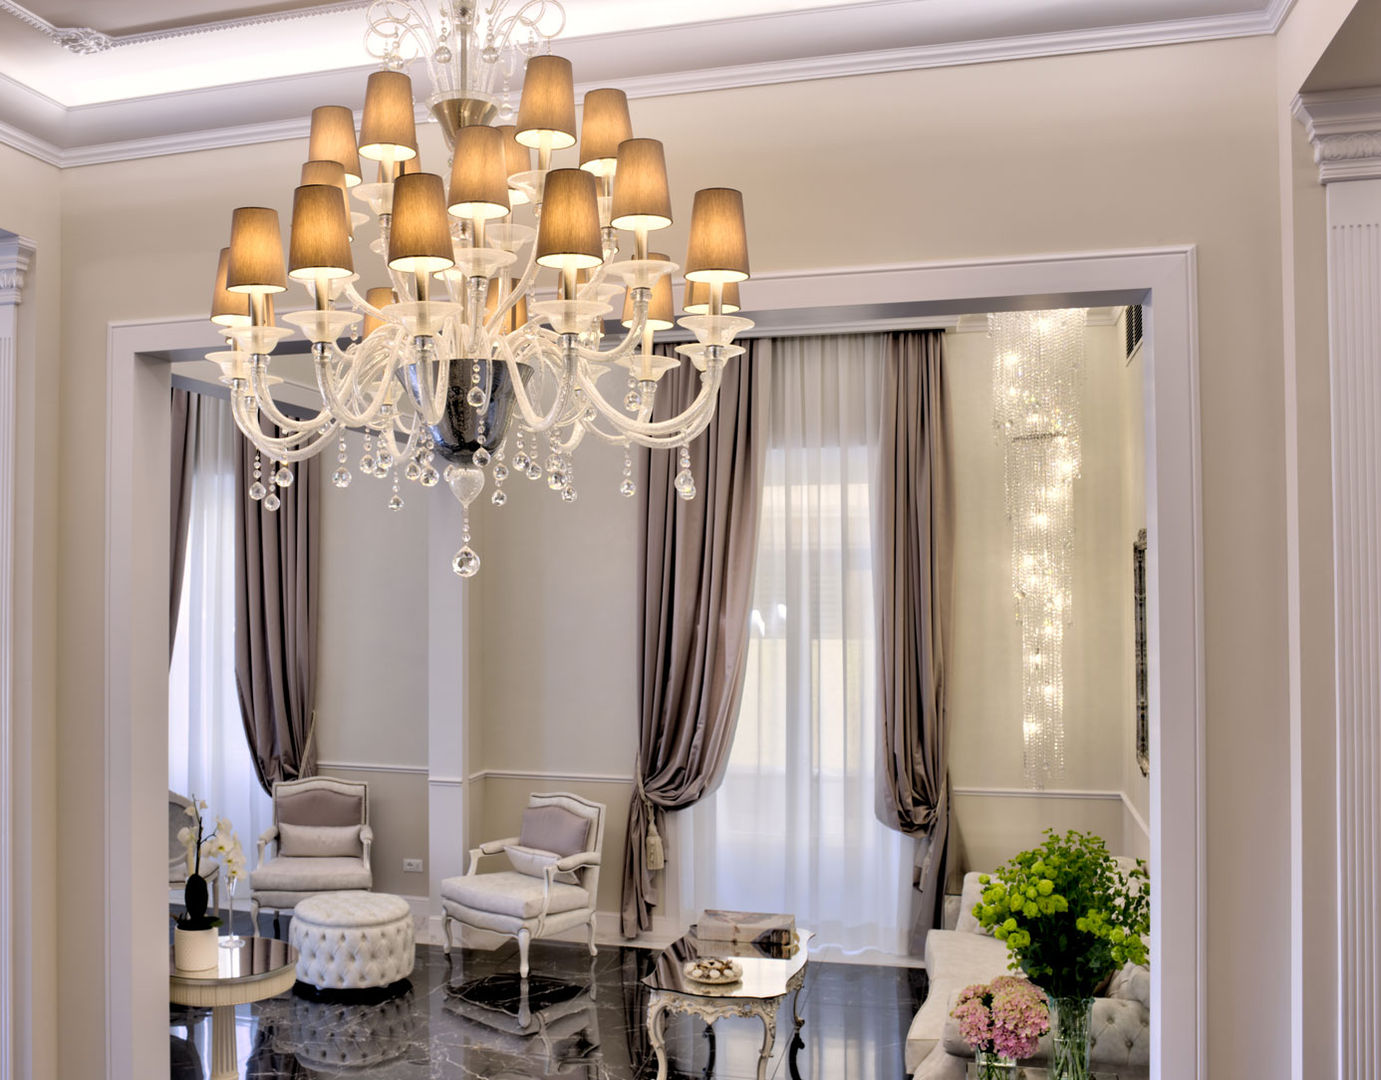 Luxury Chandelier in Murano Glass - Hotel The Moon, Florence MULTIFORME® lighting راهرو سبک کلاسیک، راهرو و پله زجاج إضاءة